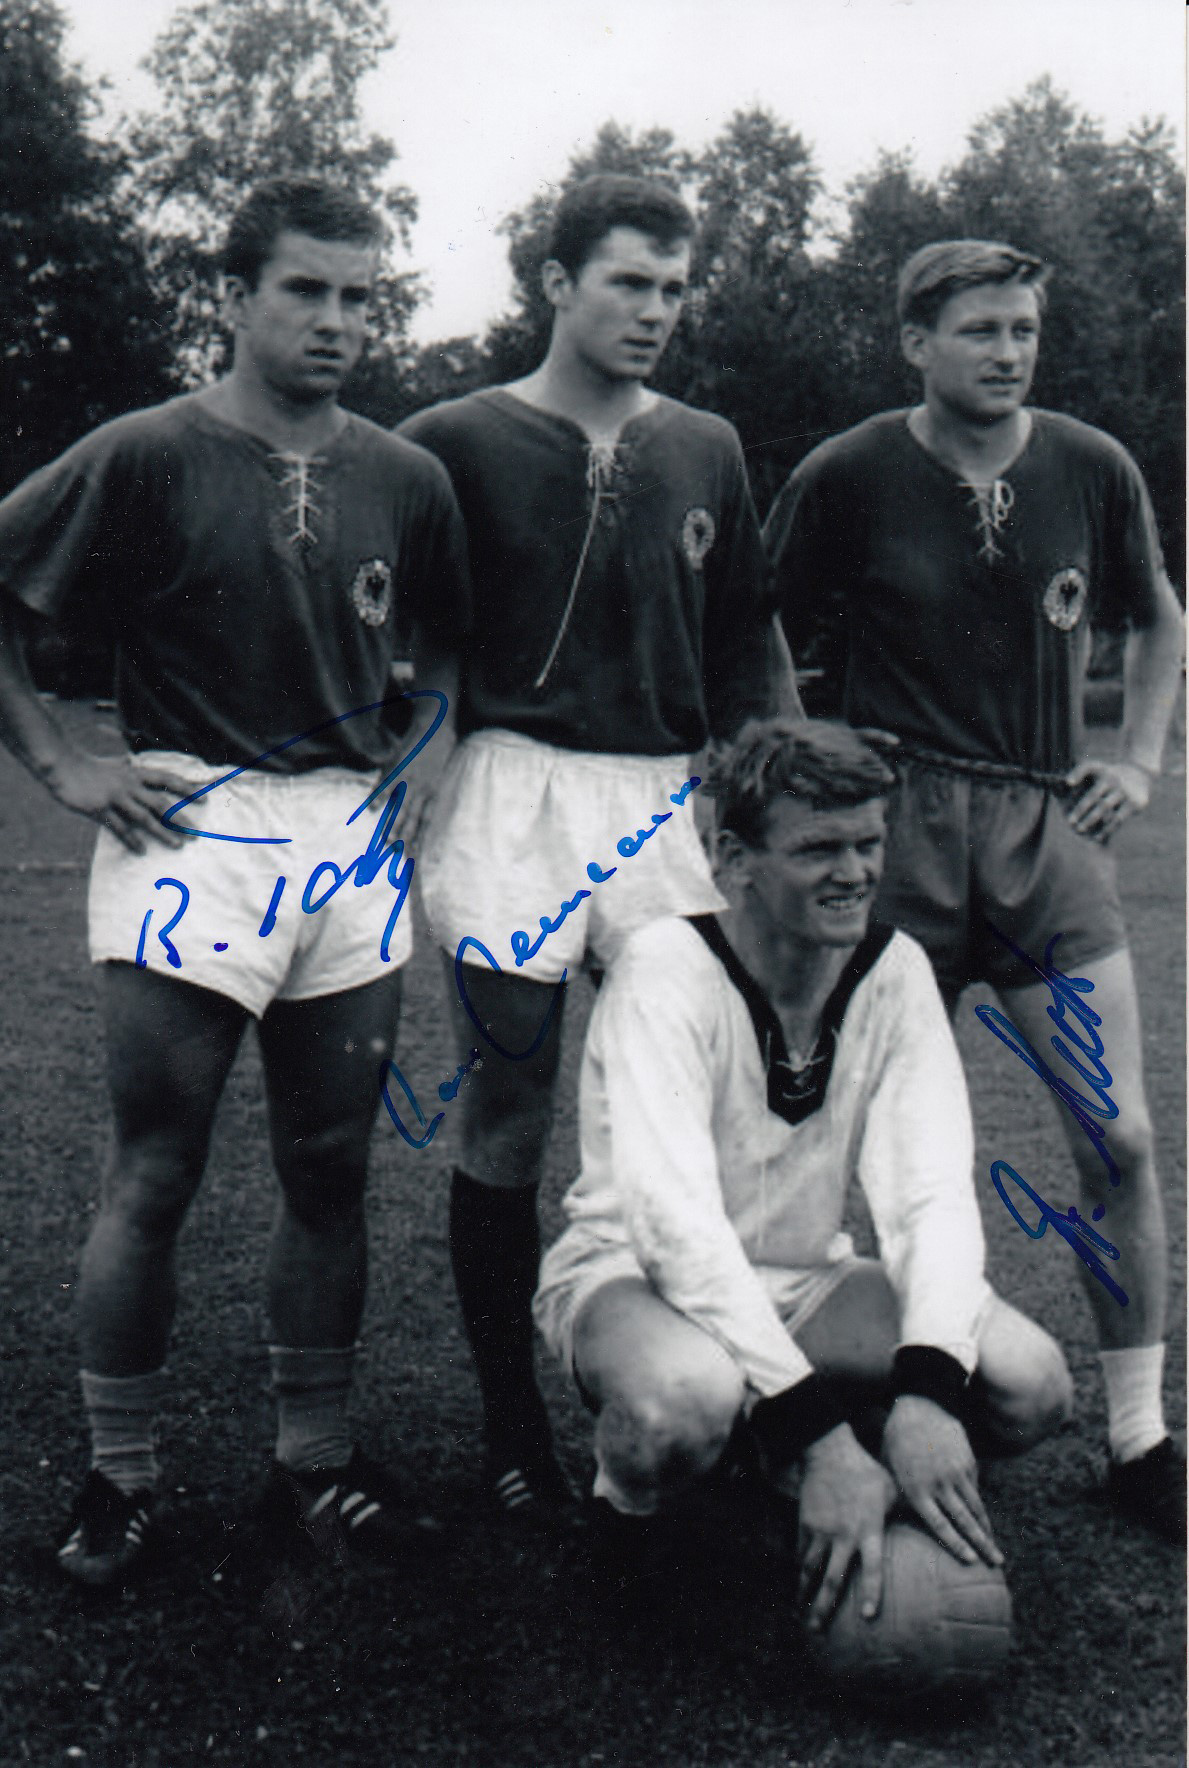 WEST GERMANY 1966: Autographed 6 x 4 photo, depicting West Germany's FRANZ BECKENBAUER, FRIEDEL